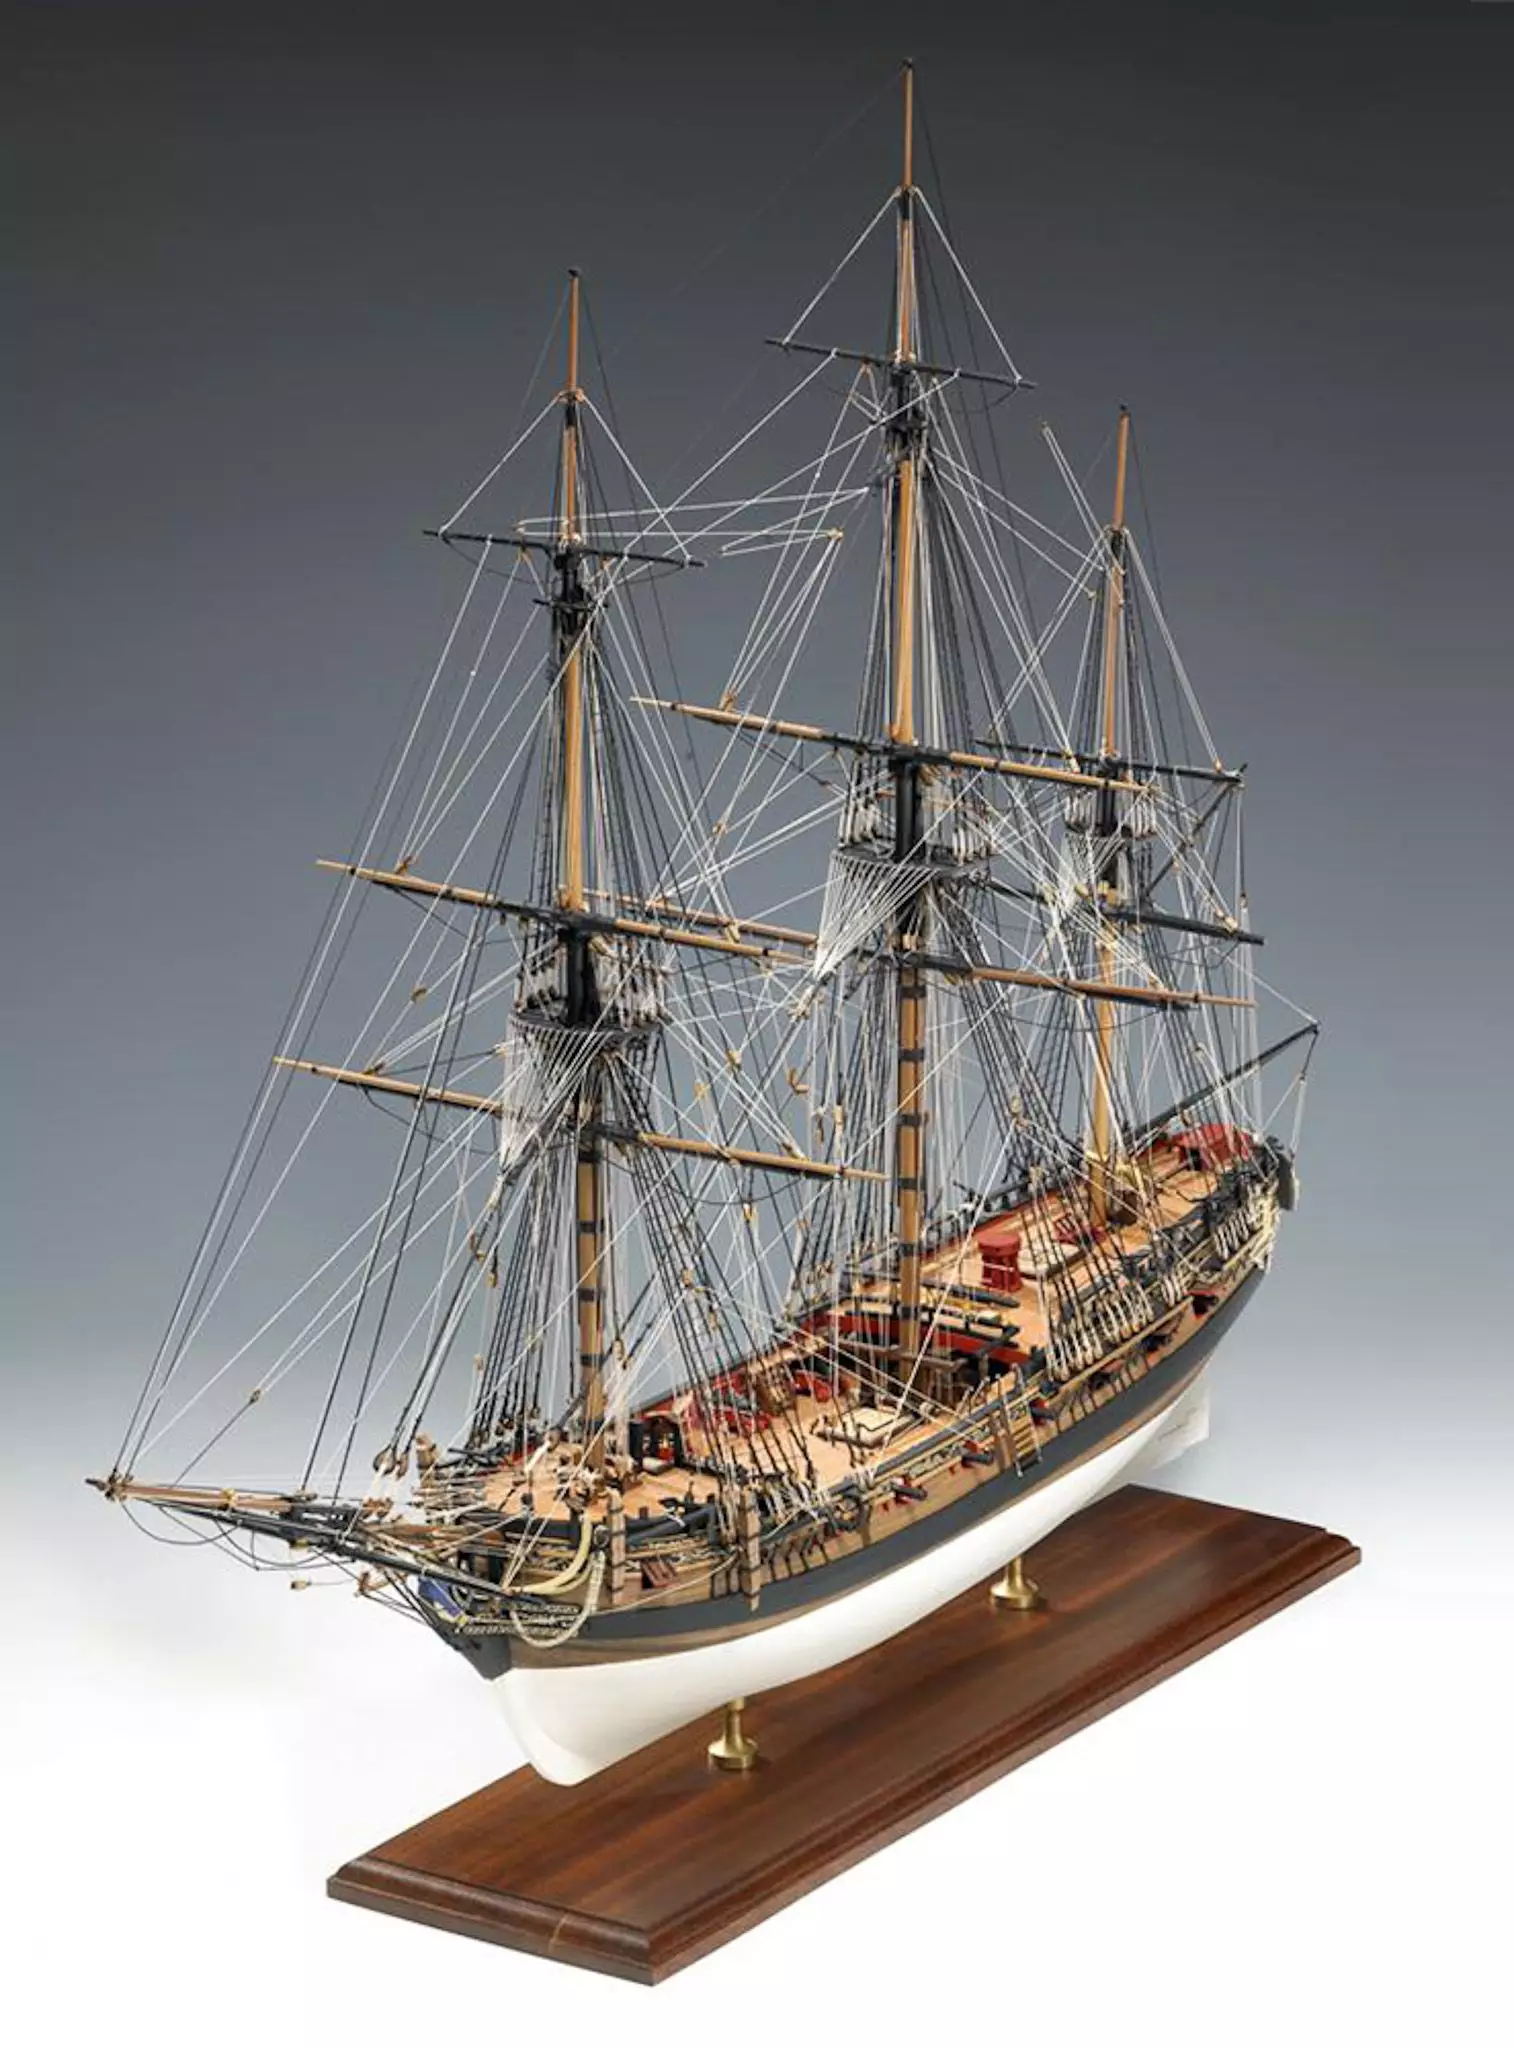 How To Build Wooden Ship Models From Kits Free Tunnel Hull Boat Plans